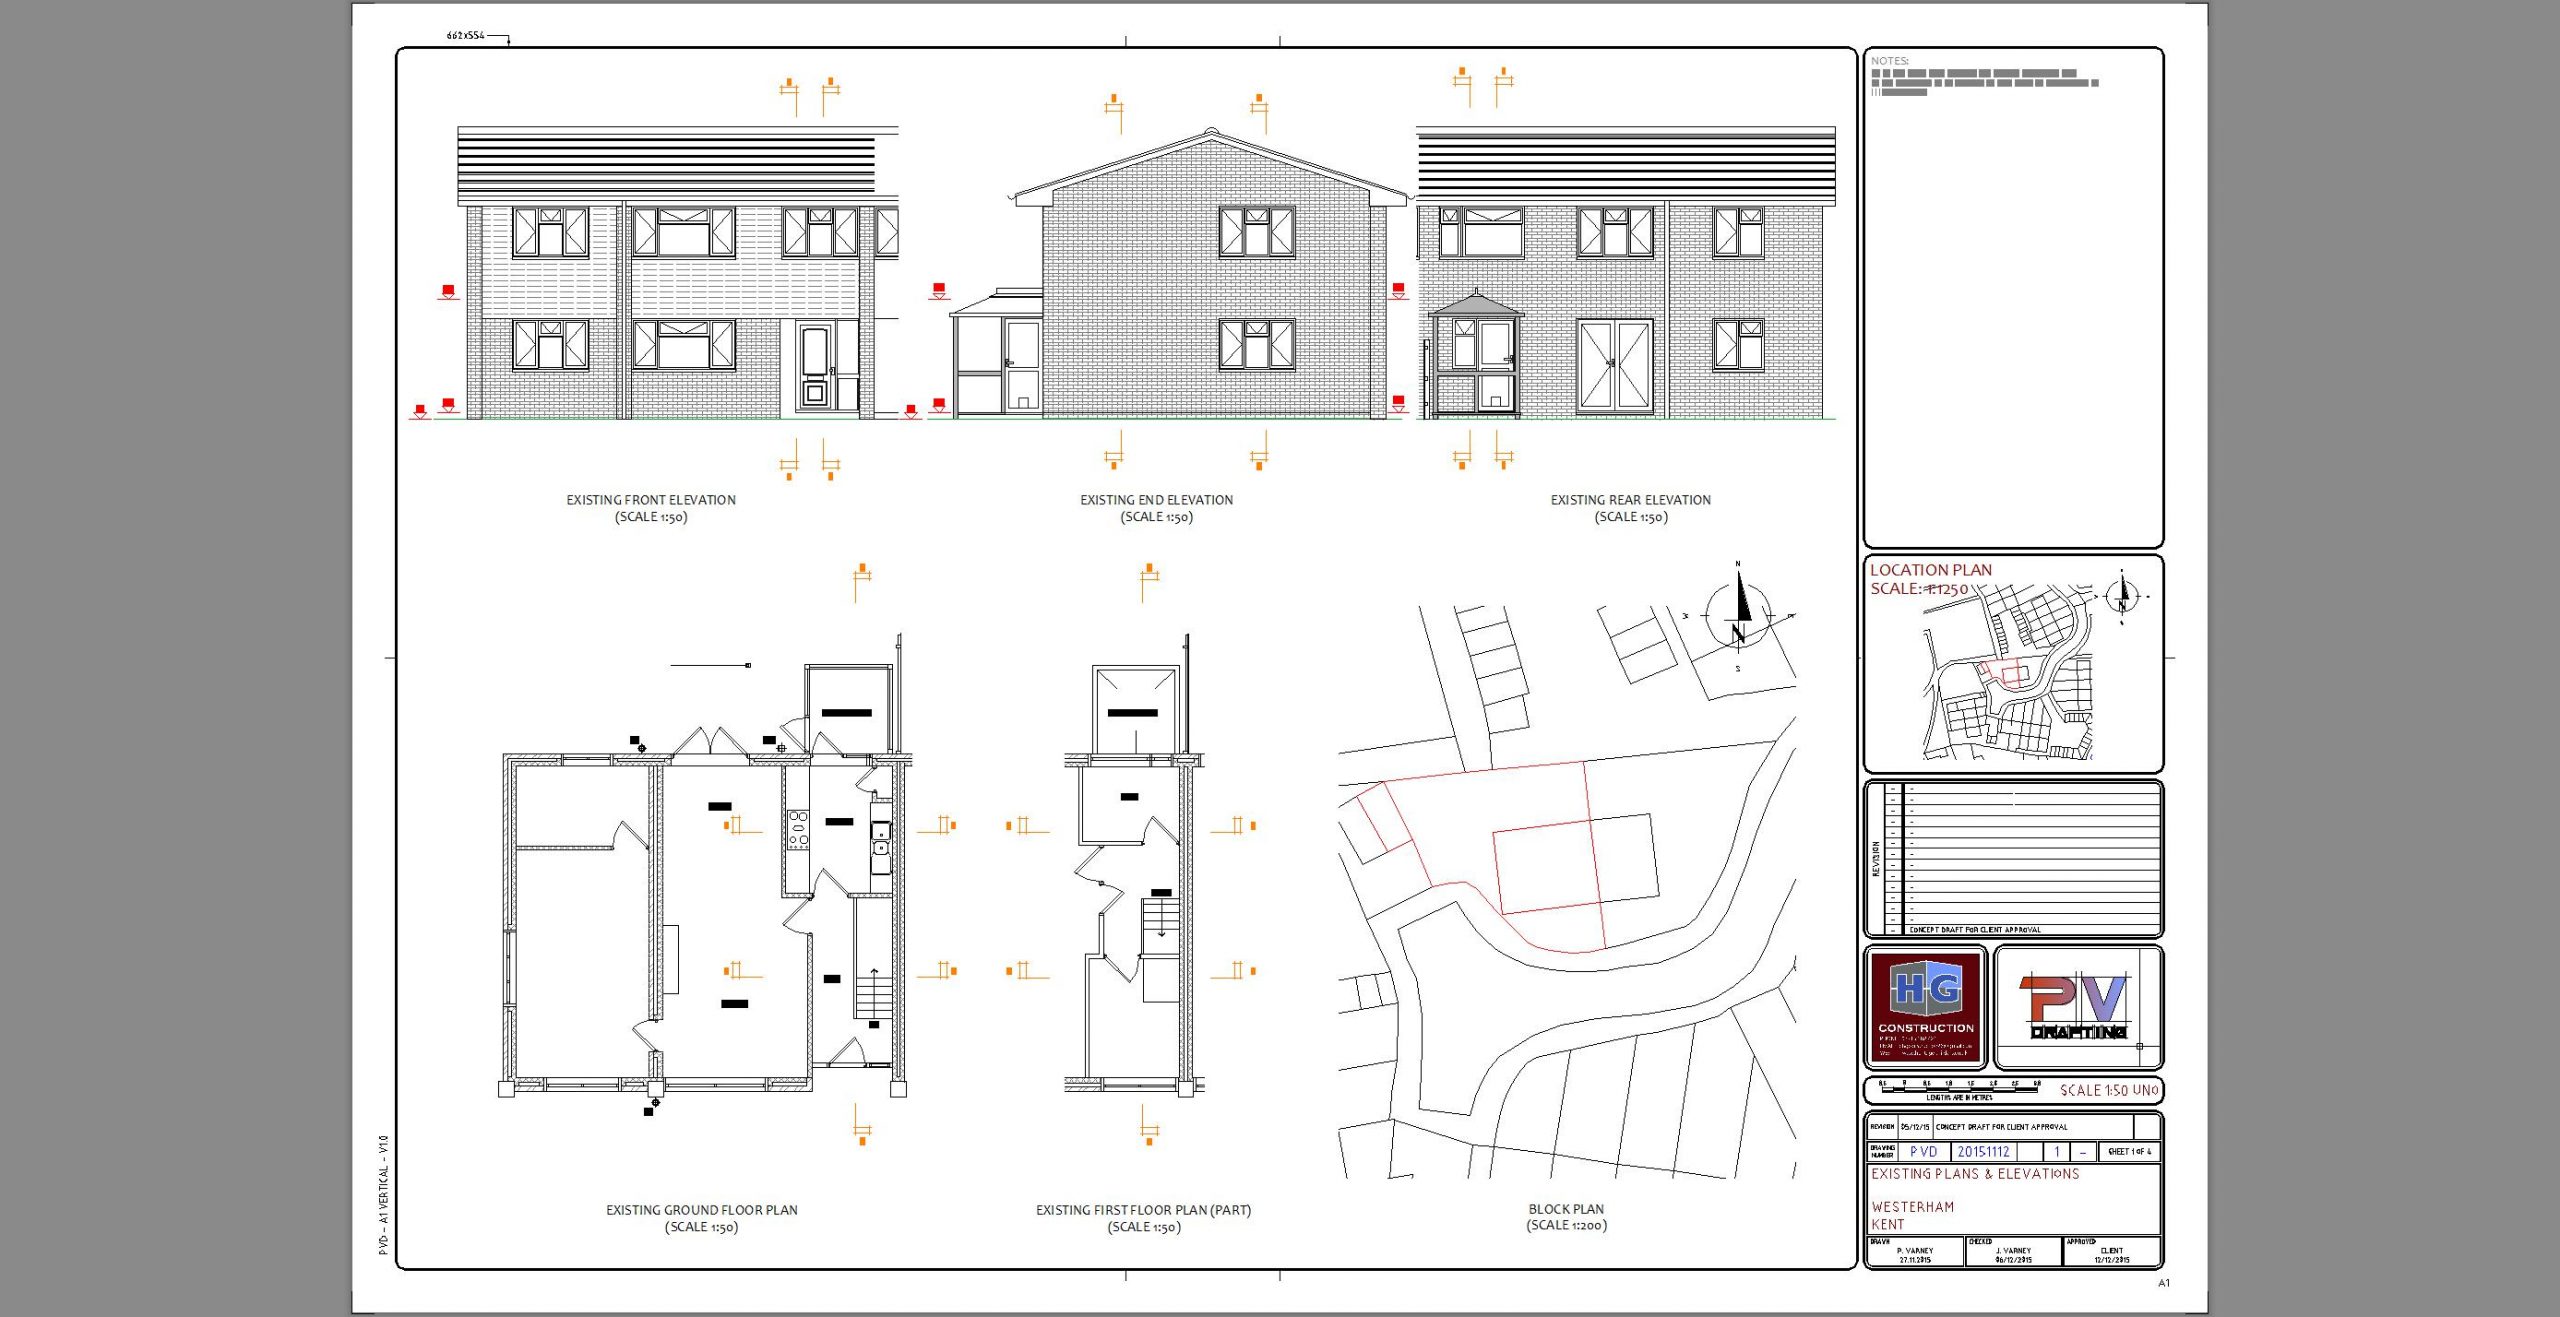 Planning Application Drawing - Westerham Kent - Existing Plans